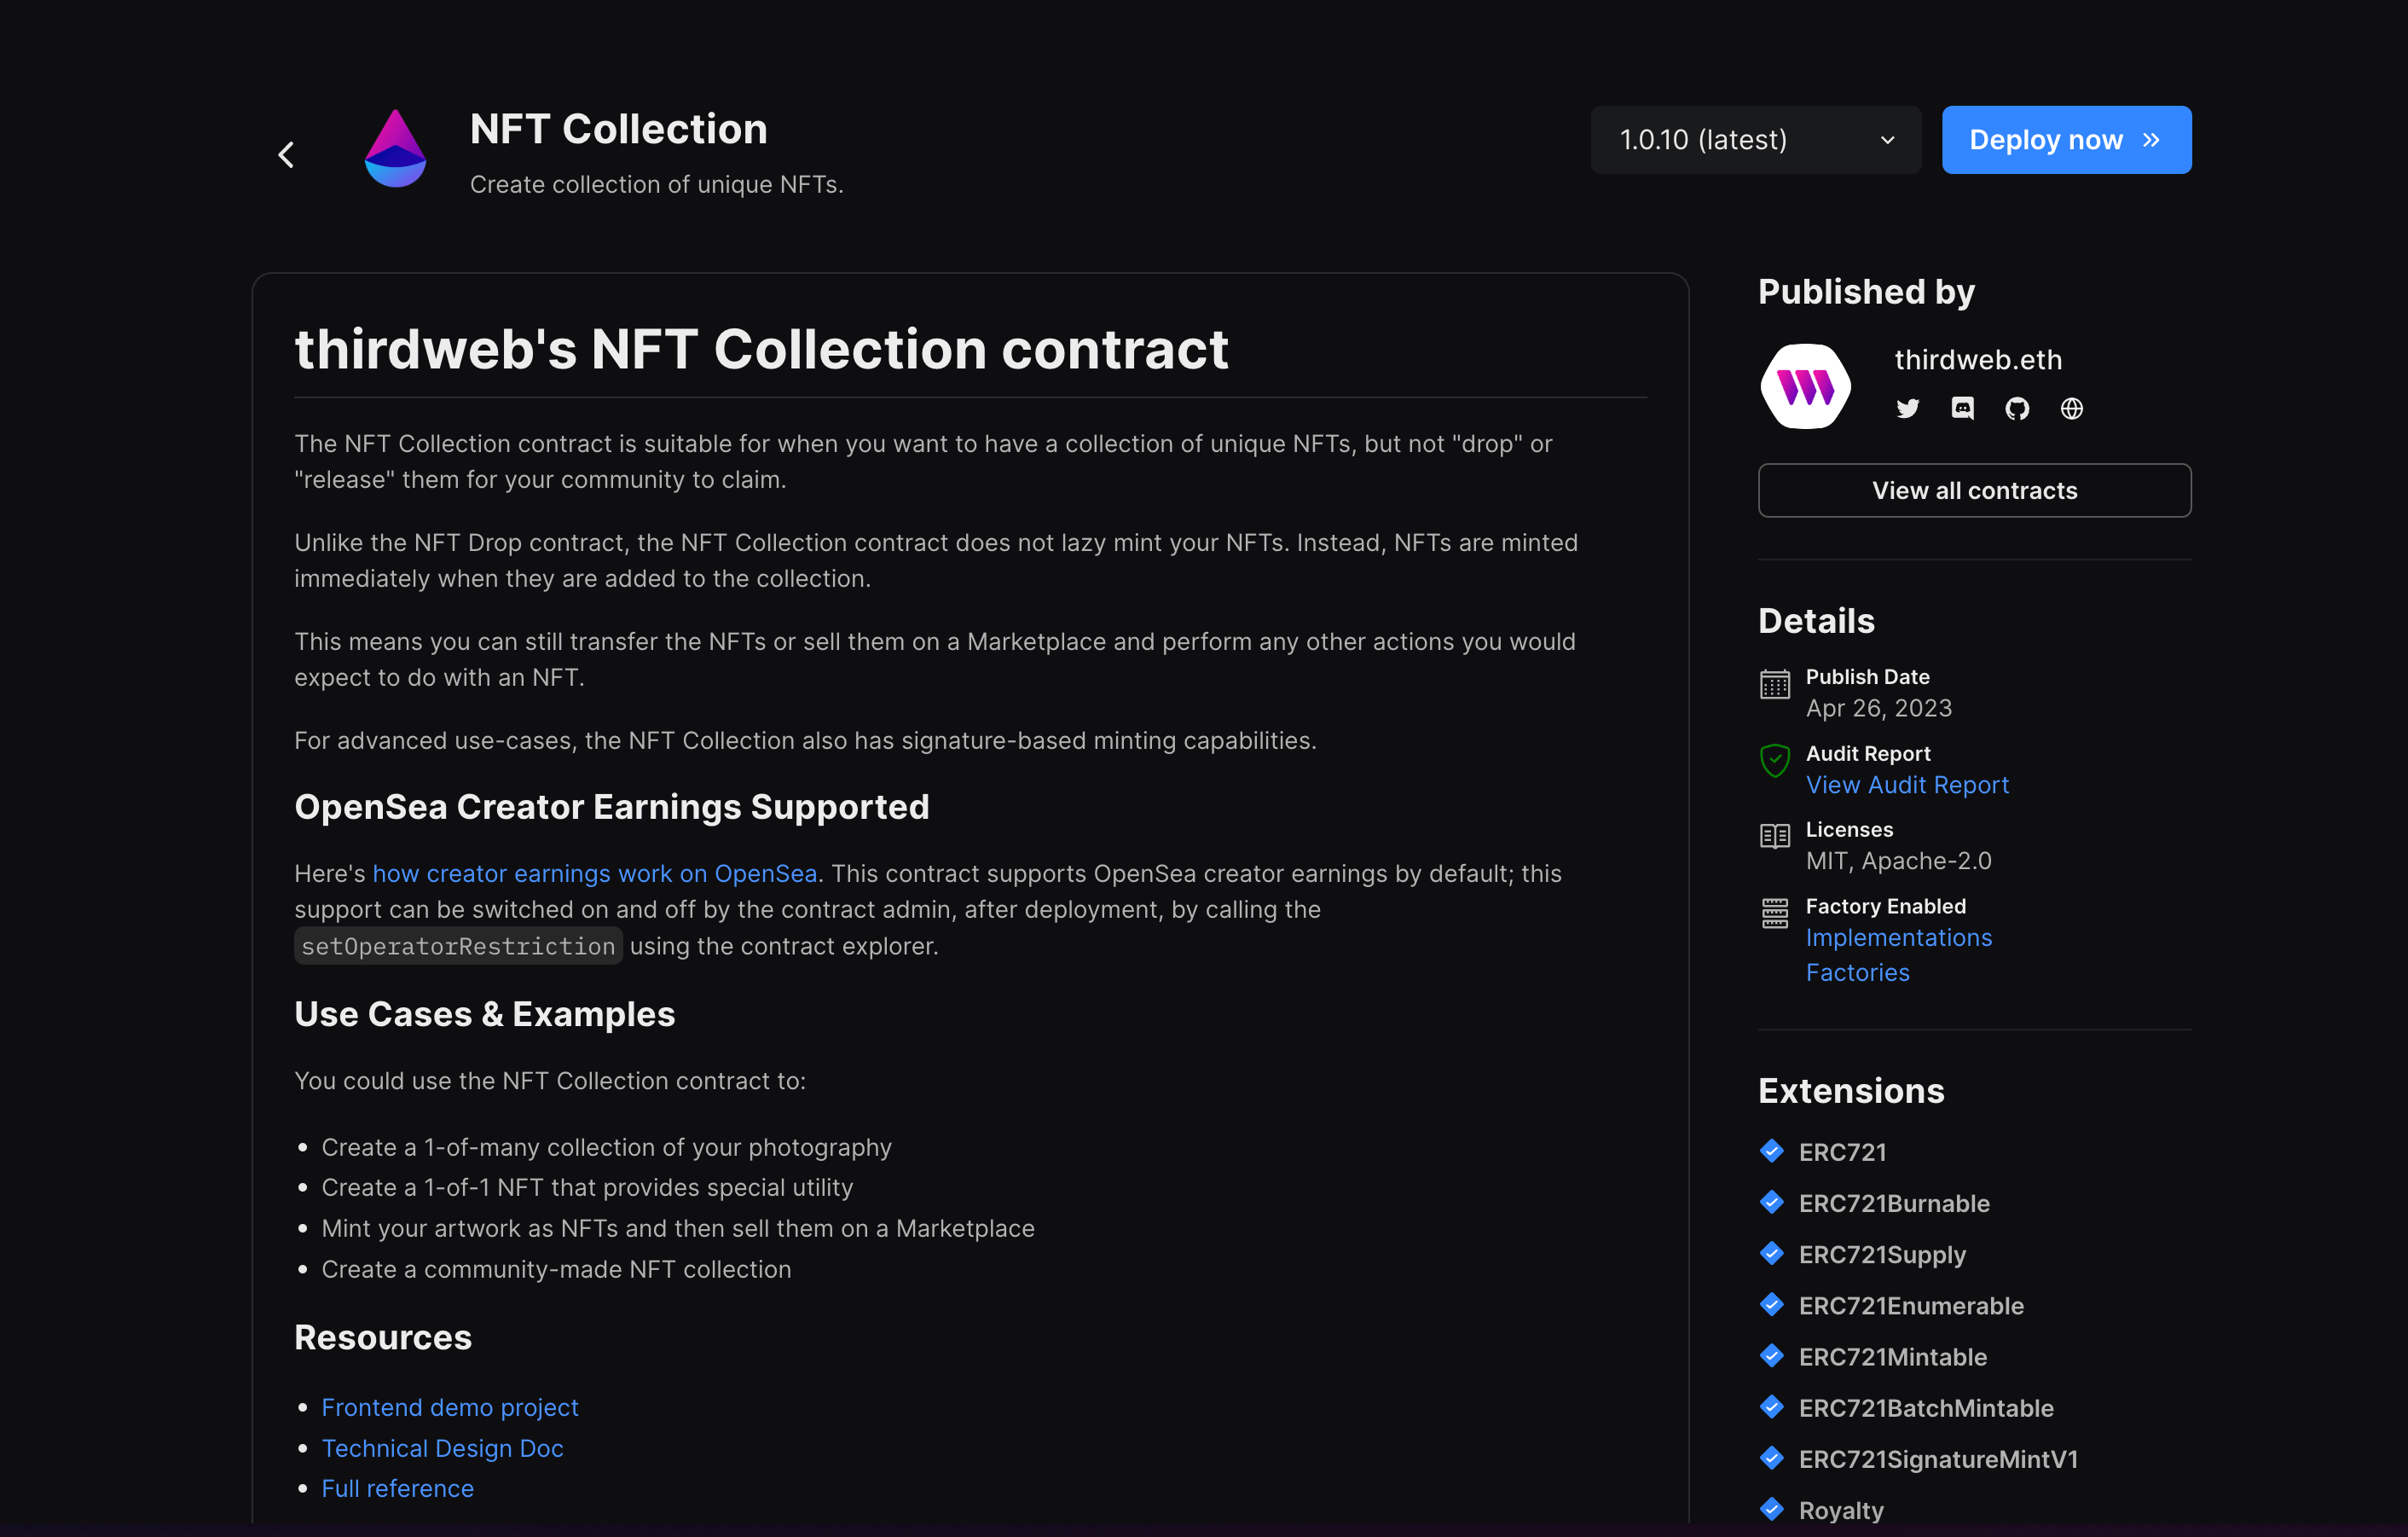 thirdweb's NFT Collection Contract